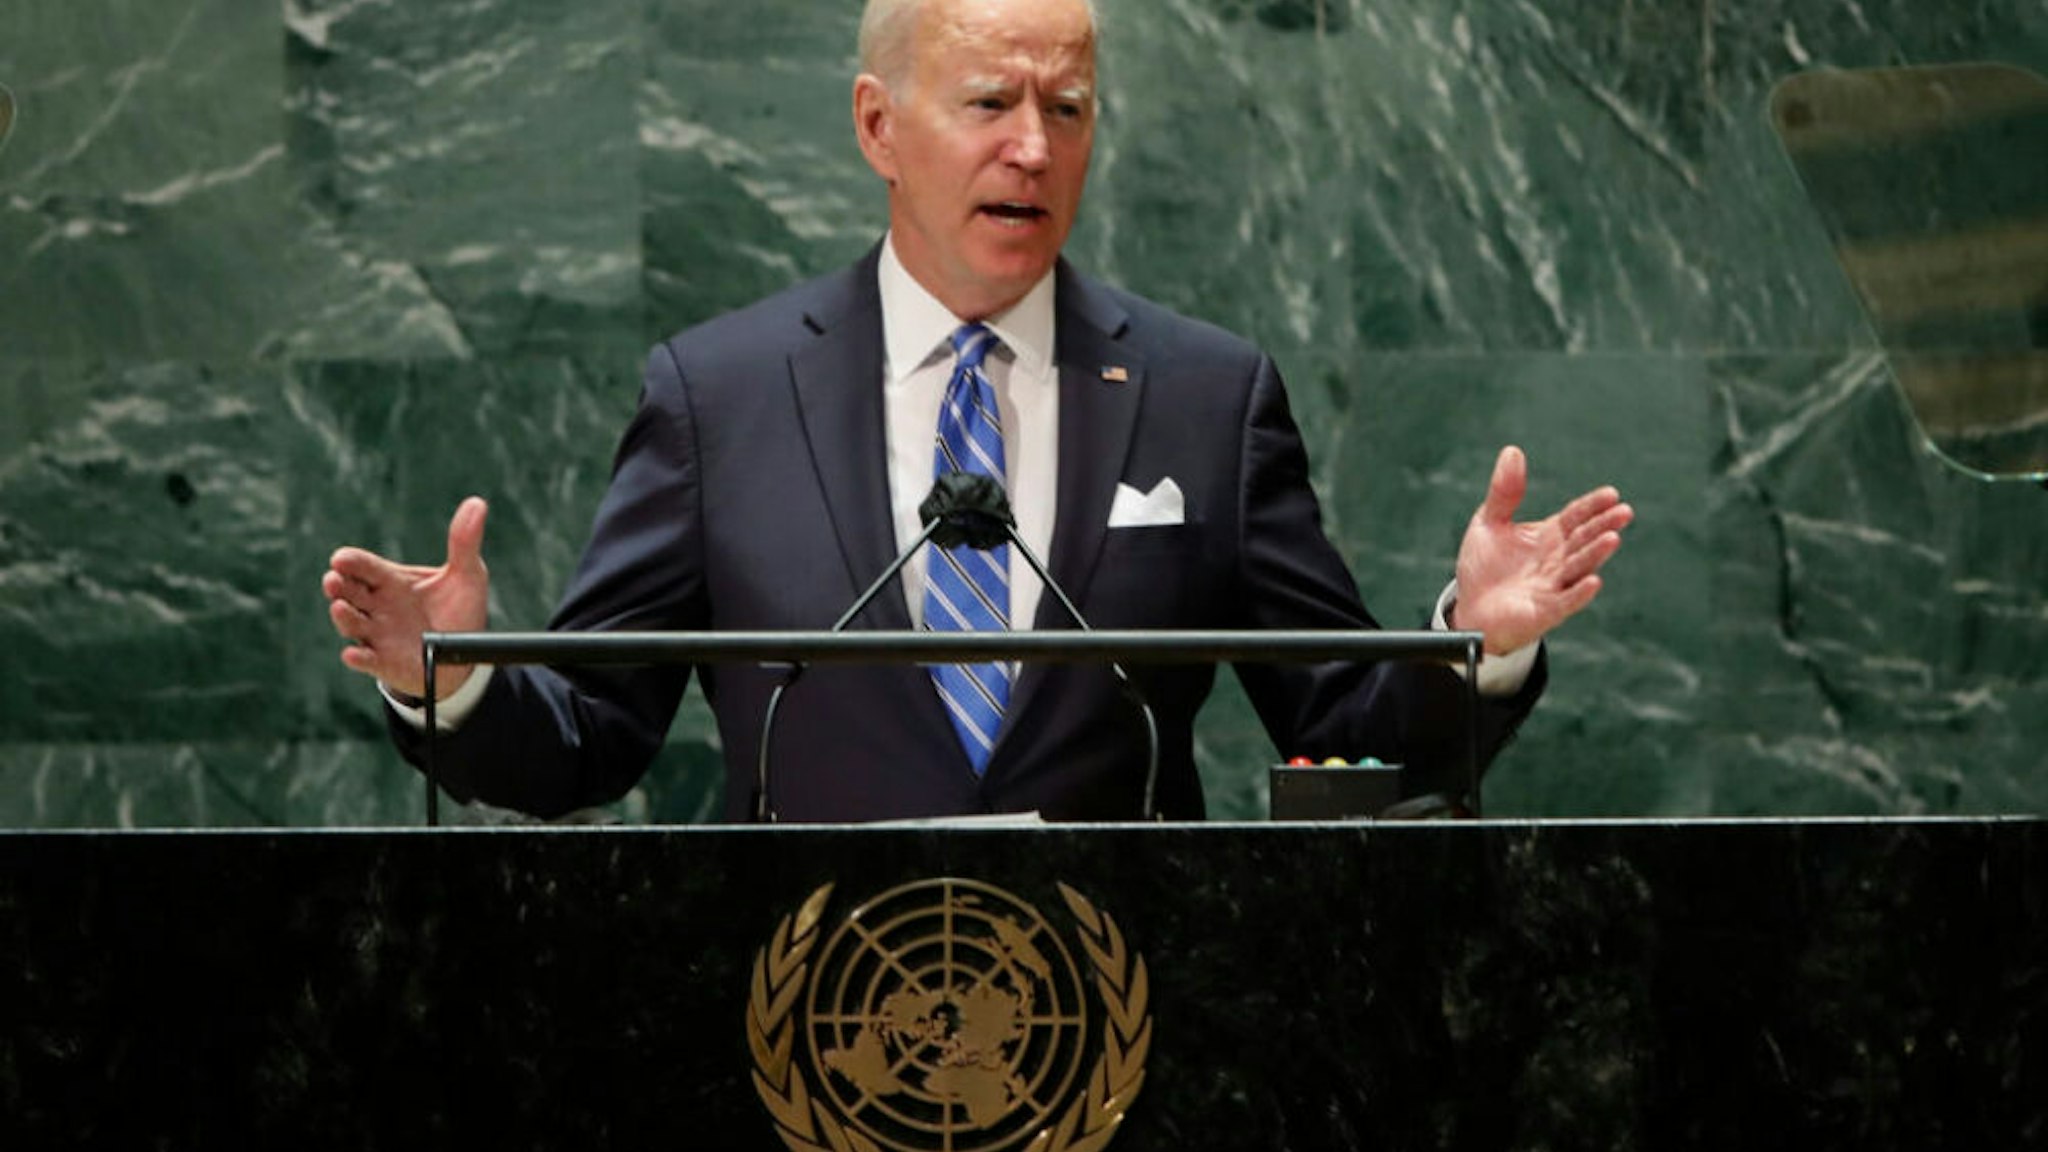 NEW YORK, NEW YORK - SEPTEMBER 21: U.S. President Joe Biden addresses the 76th Session of the U.N. General Assembly on September 21, 2021 at U.N. headquarters in New York City. More than 100 heads of state or government are attending the session in person, although the size of delegations is smaller due to the Covid-19 pandemic.